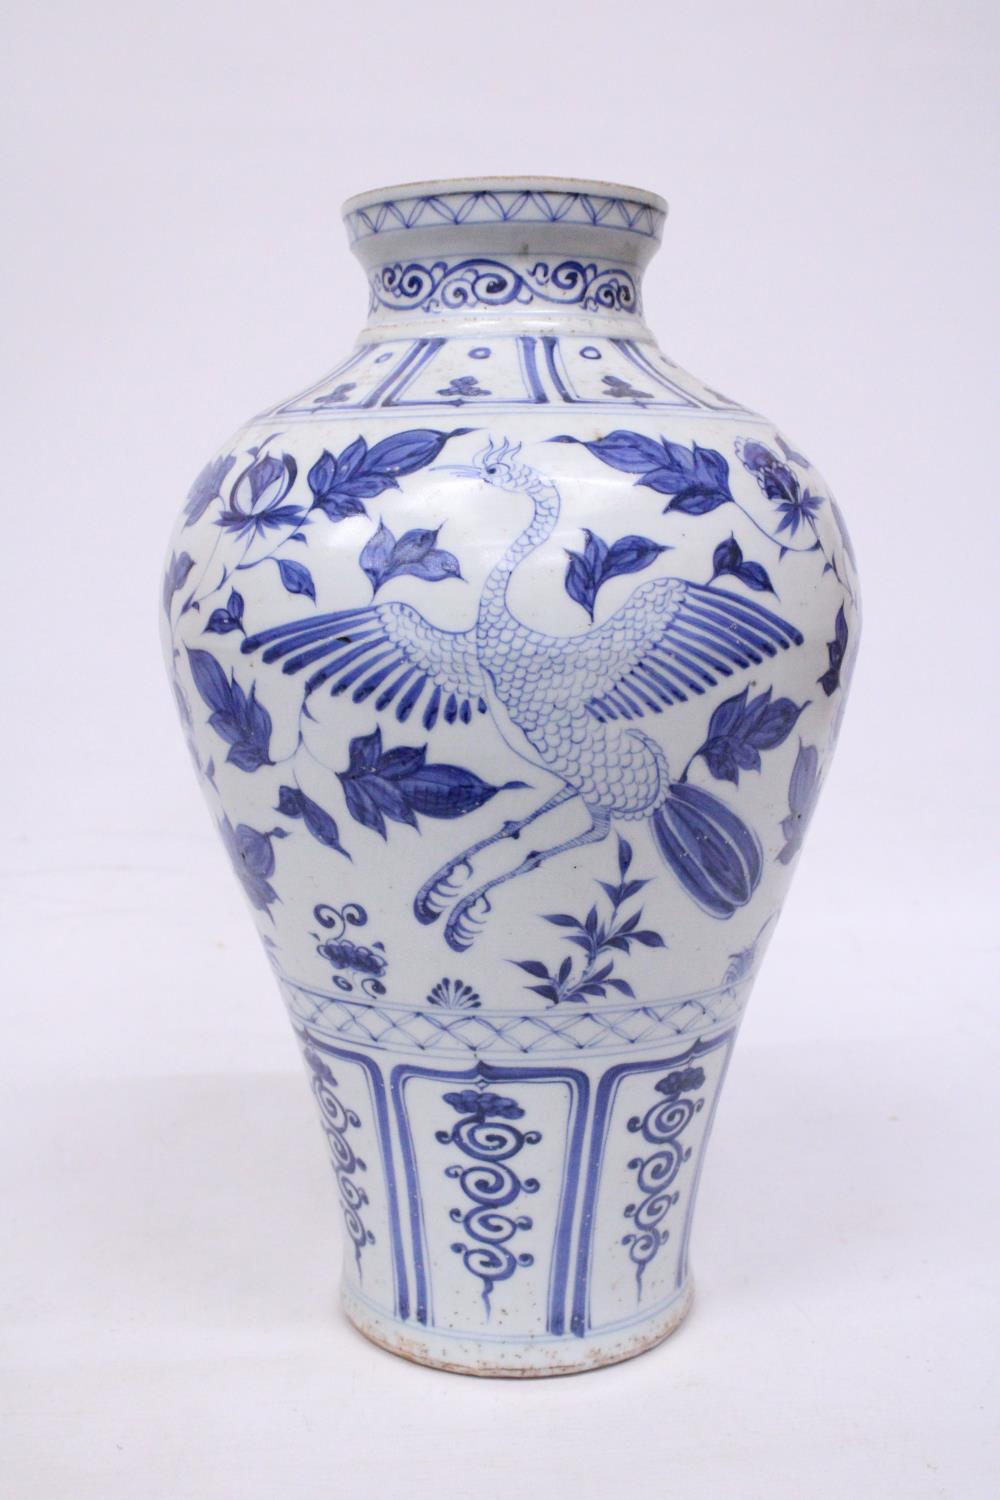 A LARGE CHINESE MING STYLE BLUE AND WHITE POTTERY MEIPING VASE DECORATED WITH CRANES IN FLIGHT - - Image 3 of 5